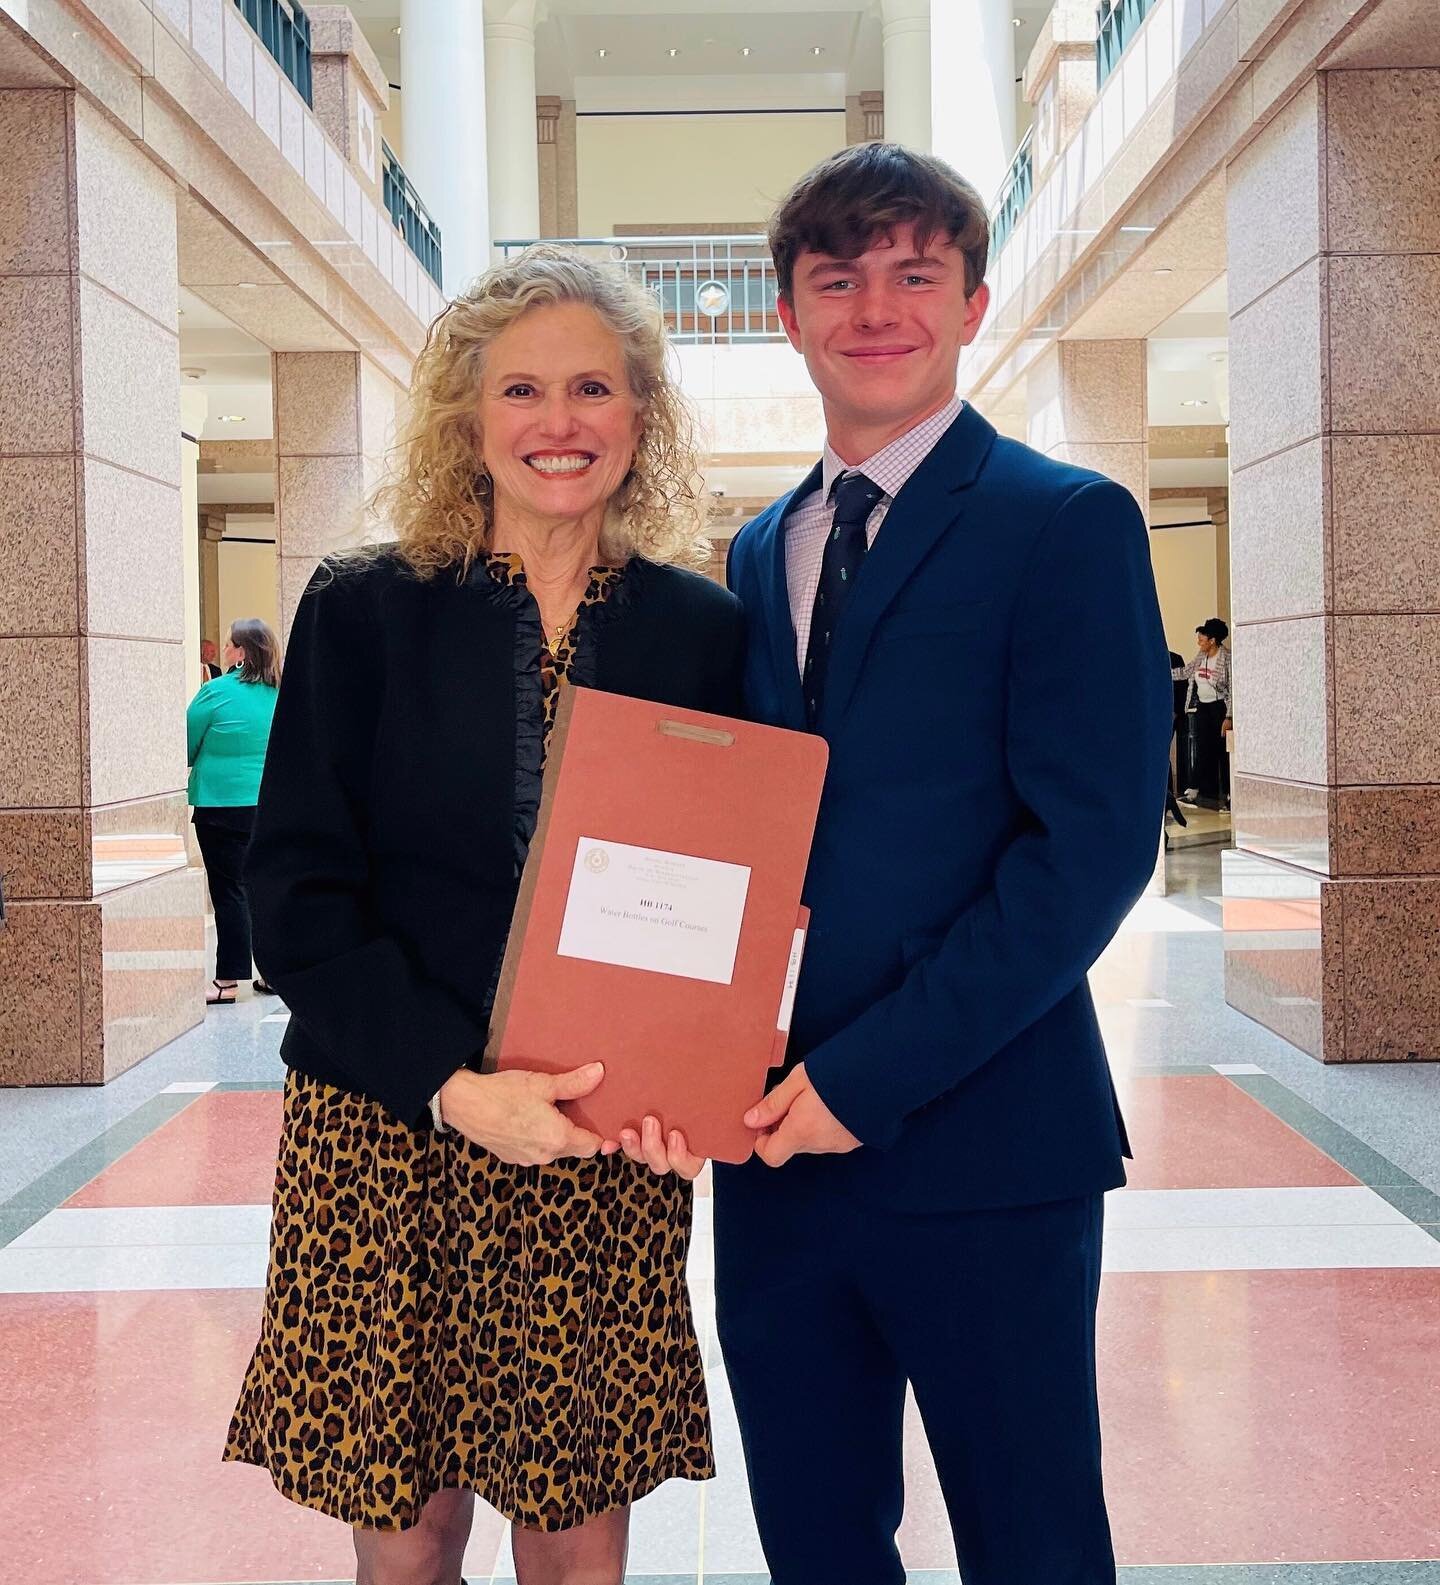 L Best part of #txlege job is authoring bill proposed by young constituents. Max, a @WHSChaps student &amp; member of the golf team, provided awesome testimony on HB1174 allowing municipalities to prohibit single use water bottles on city-owned golf 